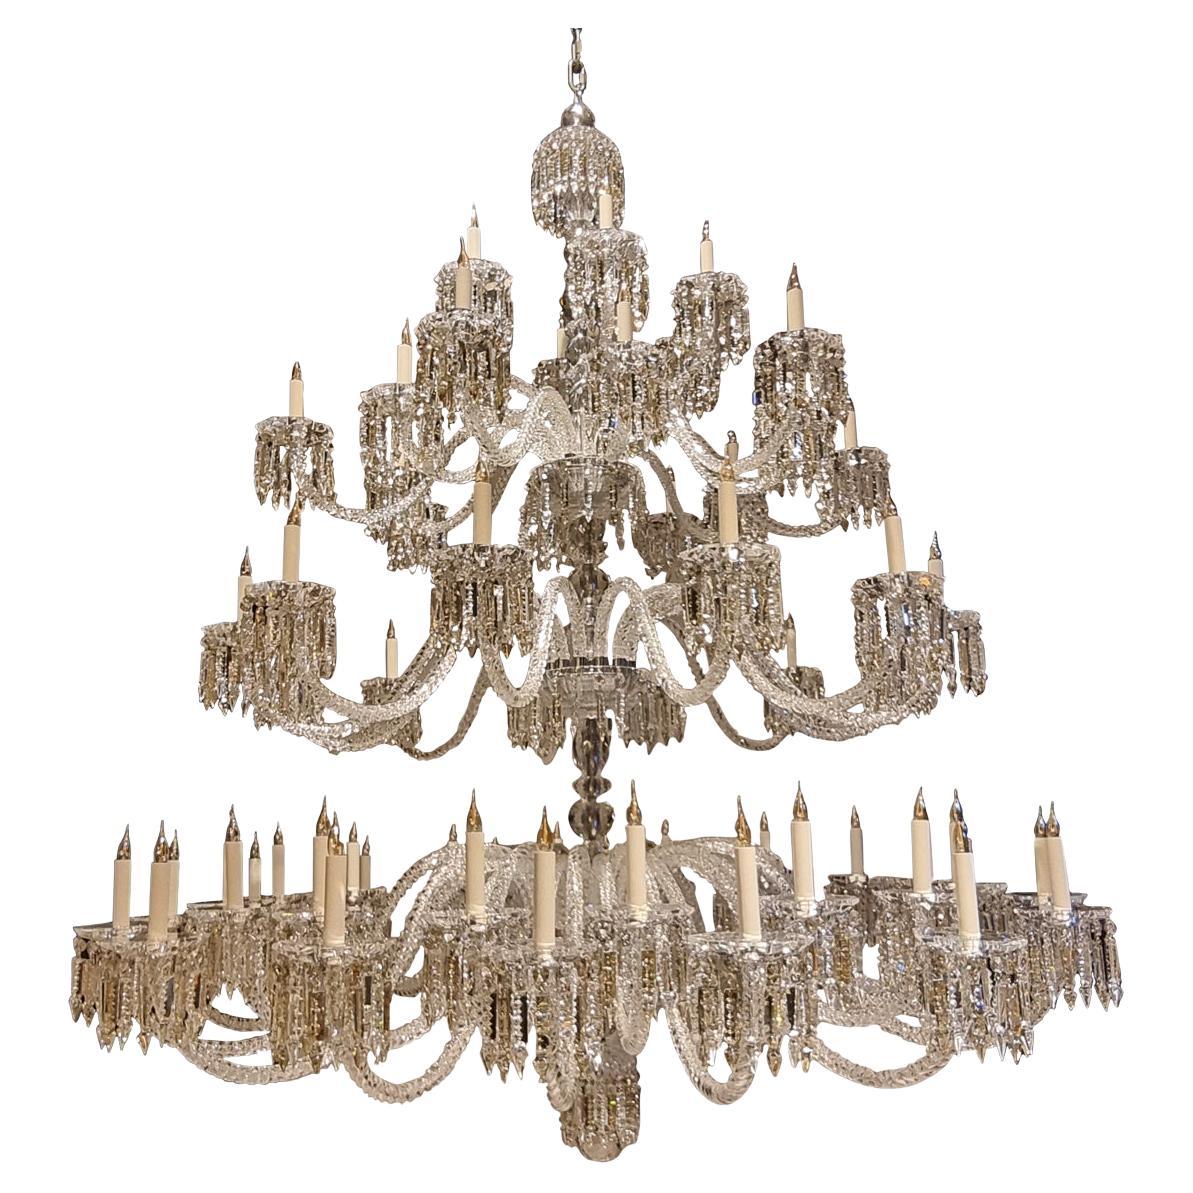 19th Century Crystal Chandelier with 62 Lights Inspired by Baccarat For Sale